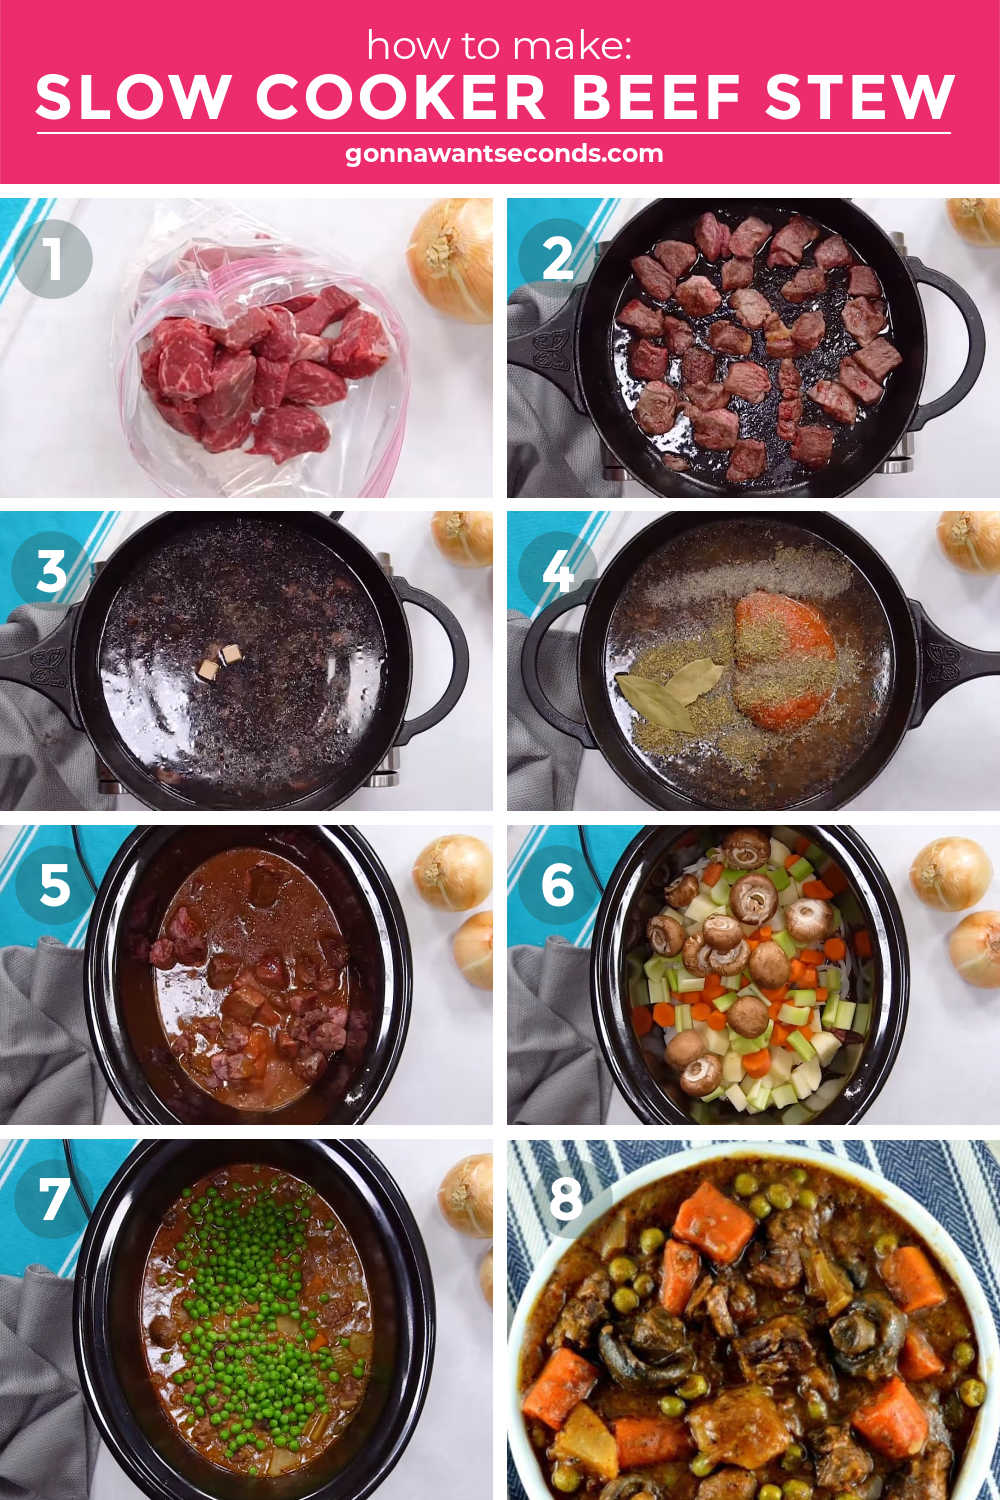 Step by step how to make slow cooker beef stew